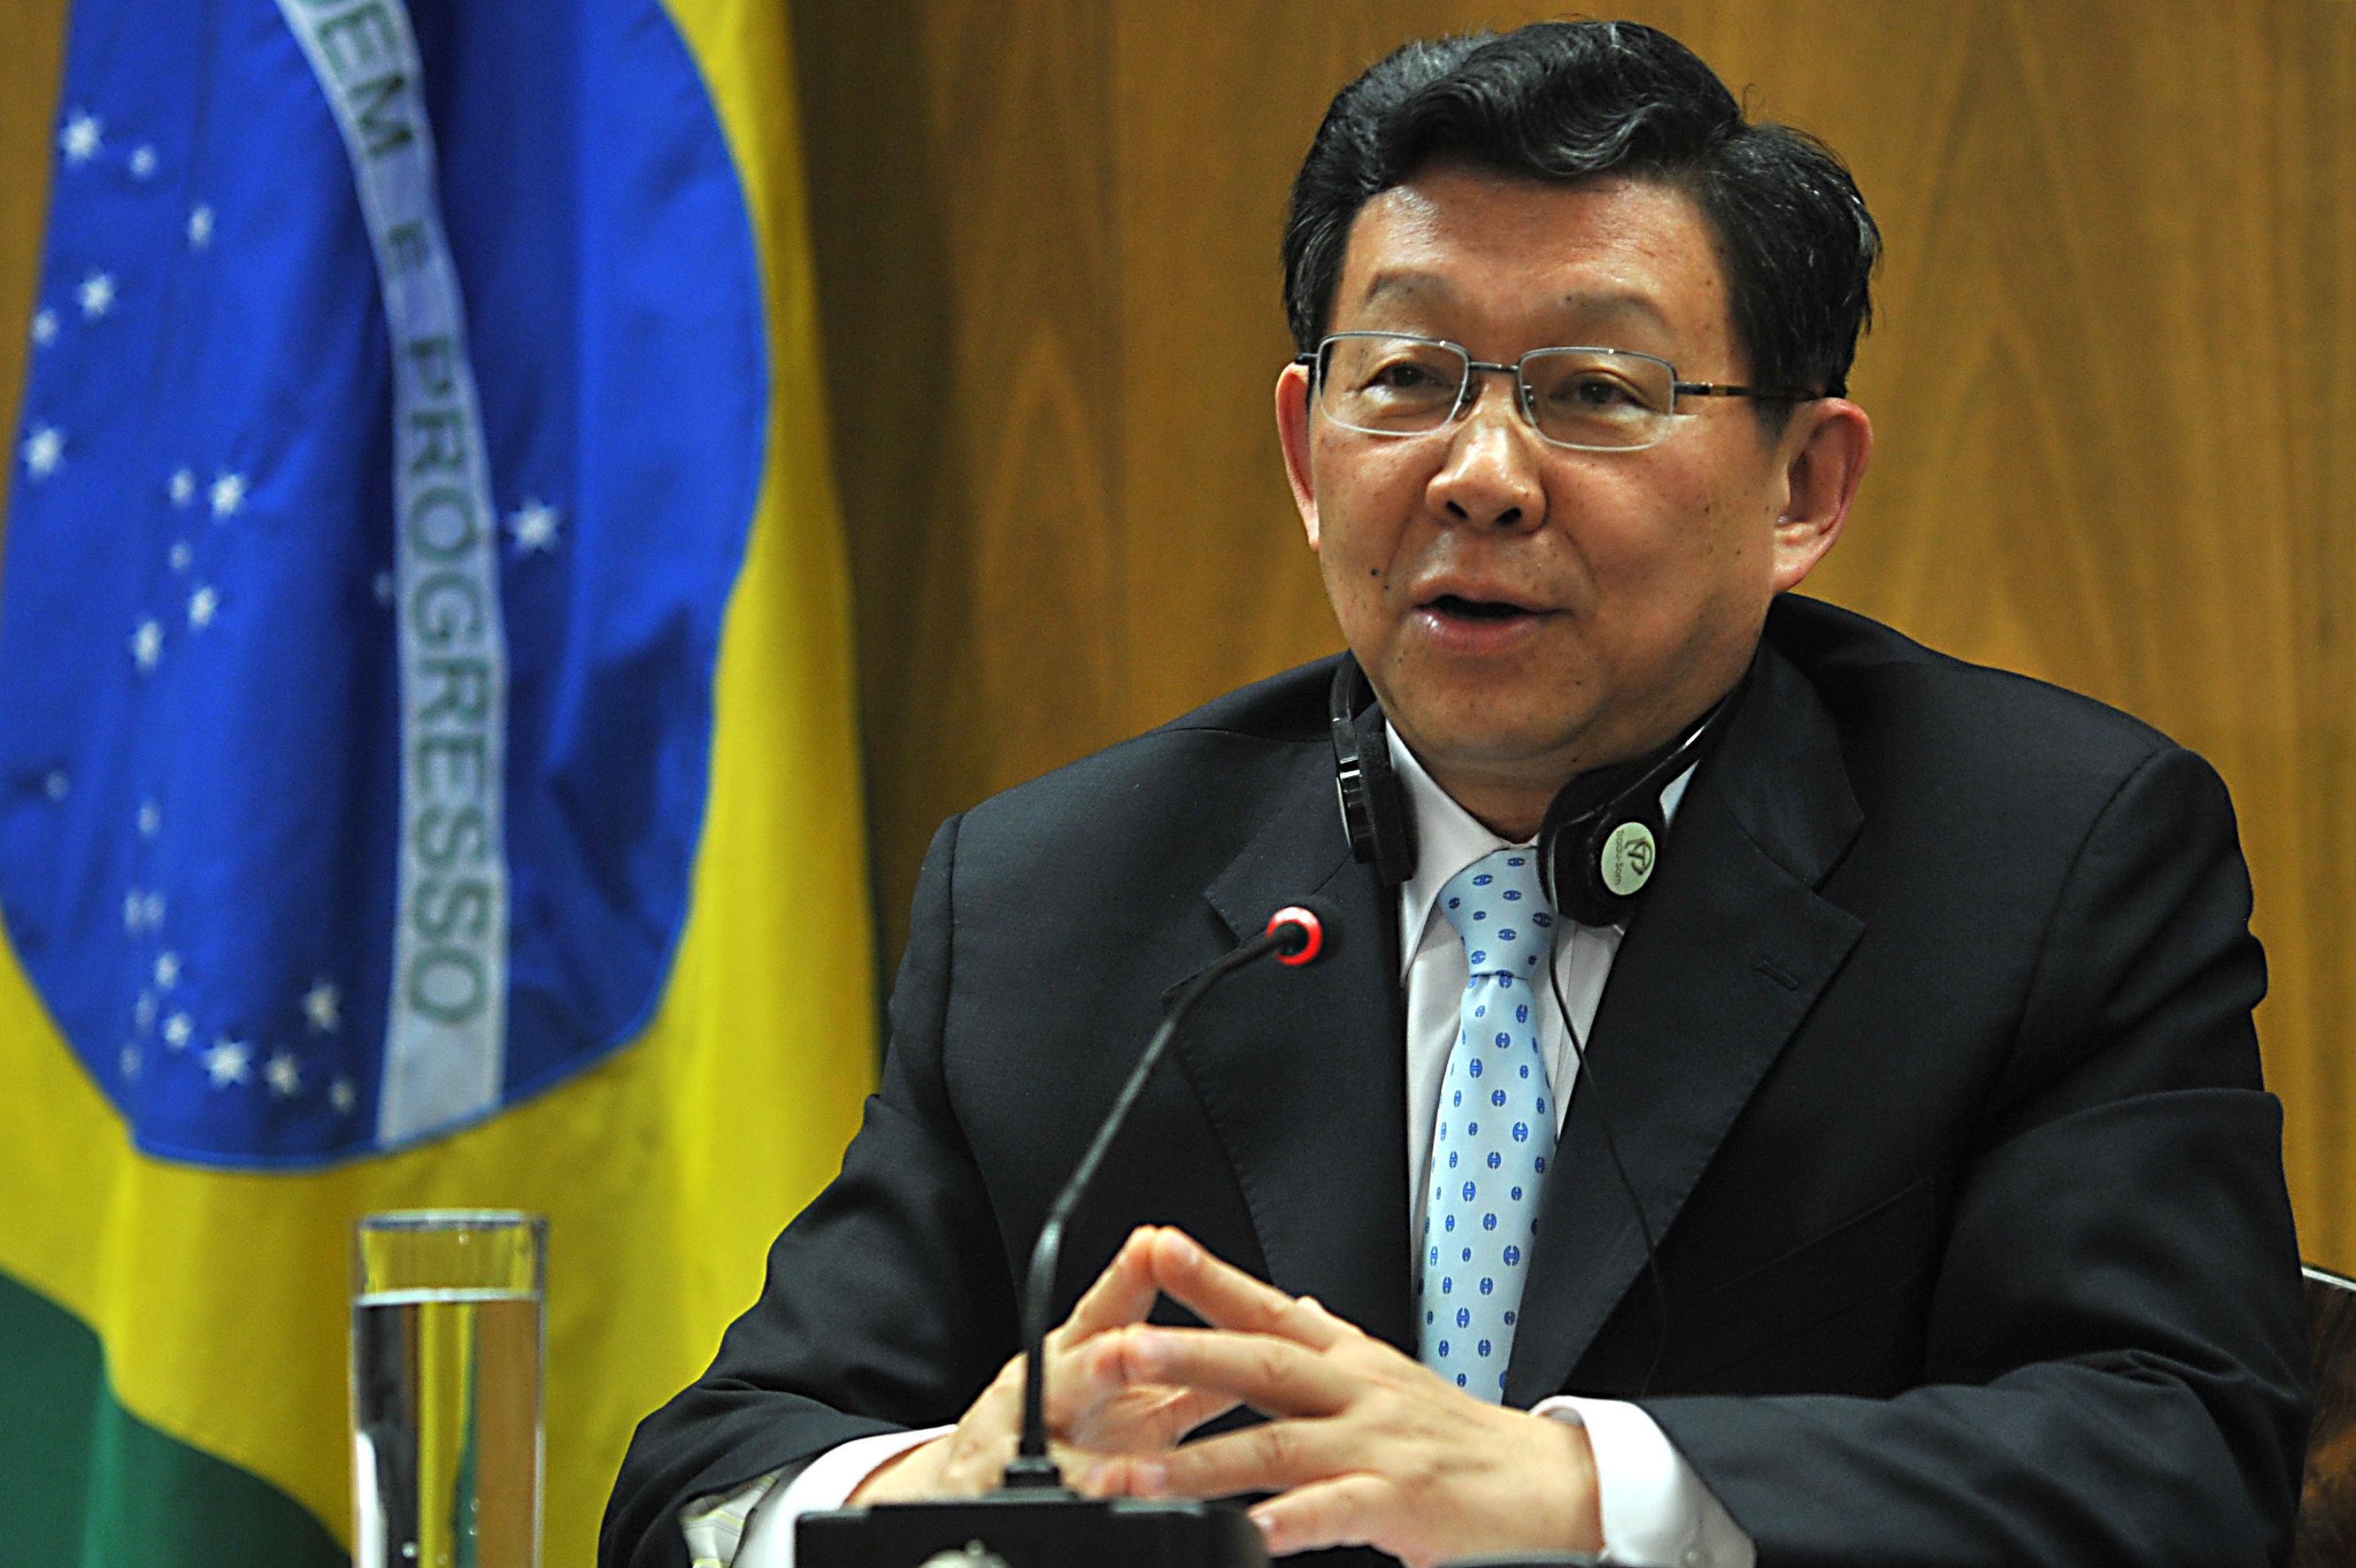 Chen Deming, China's Minister of Commerce, at Brazil-China business talks at the Palácio do Itamaraty in May 2011